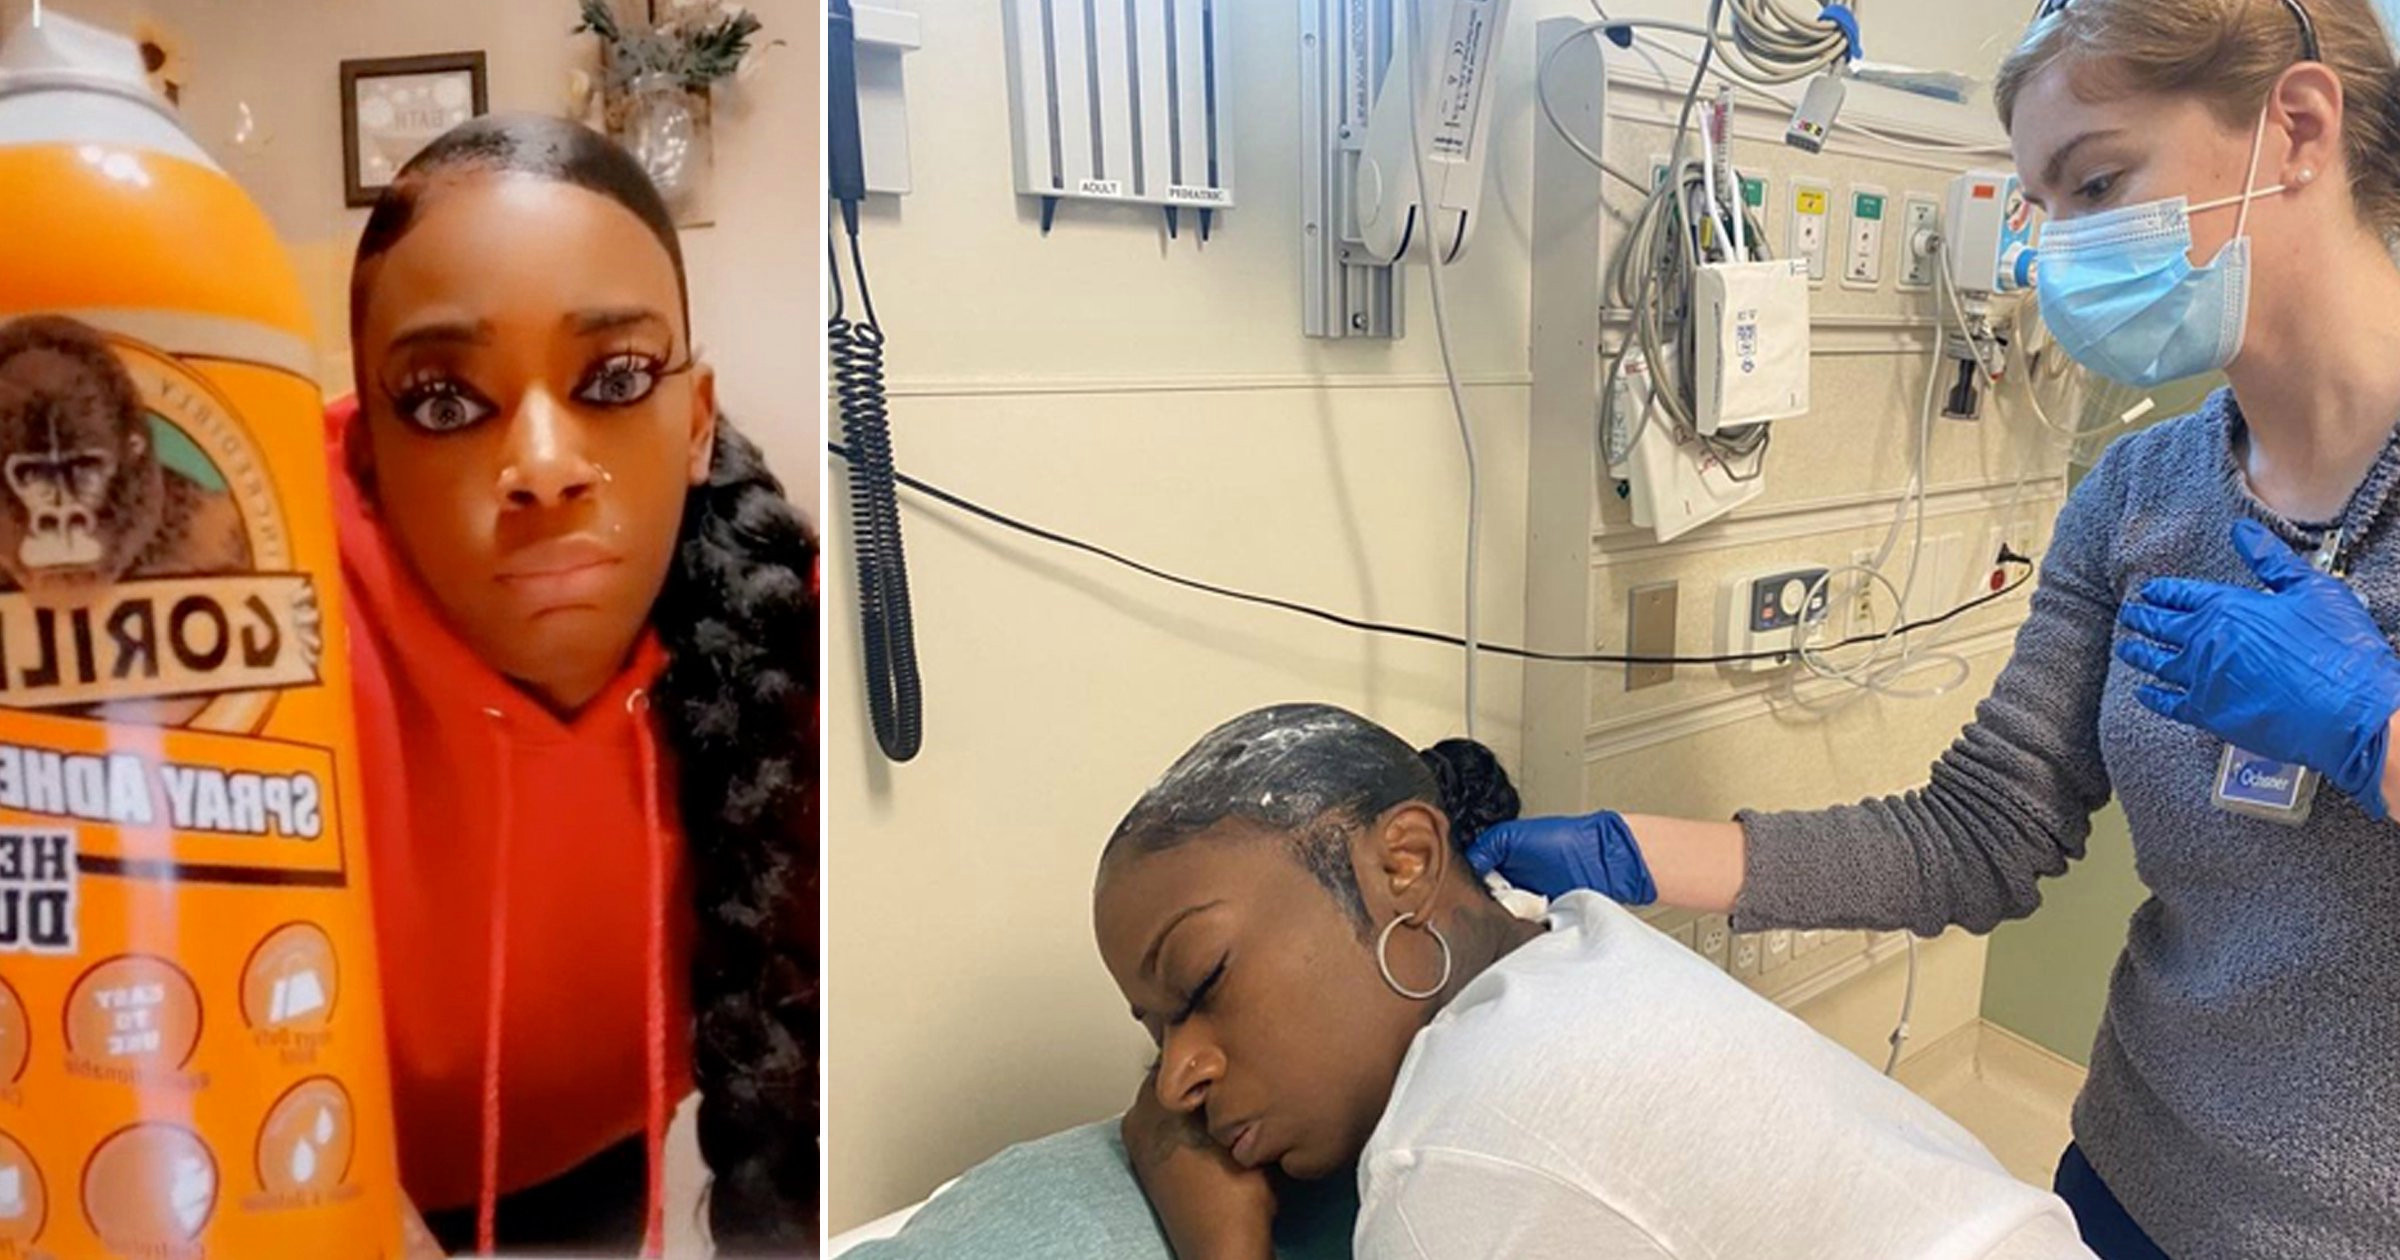 Woman has hospital treatment after styling hair with Gorilla Glue